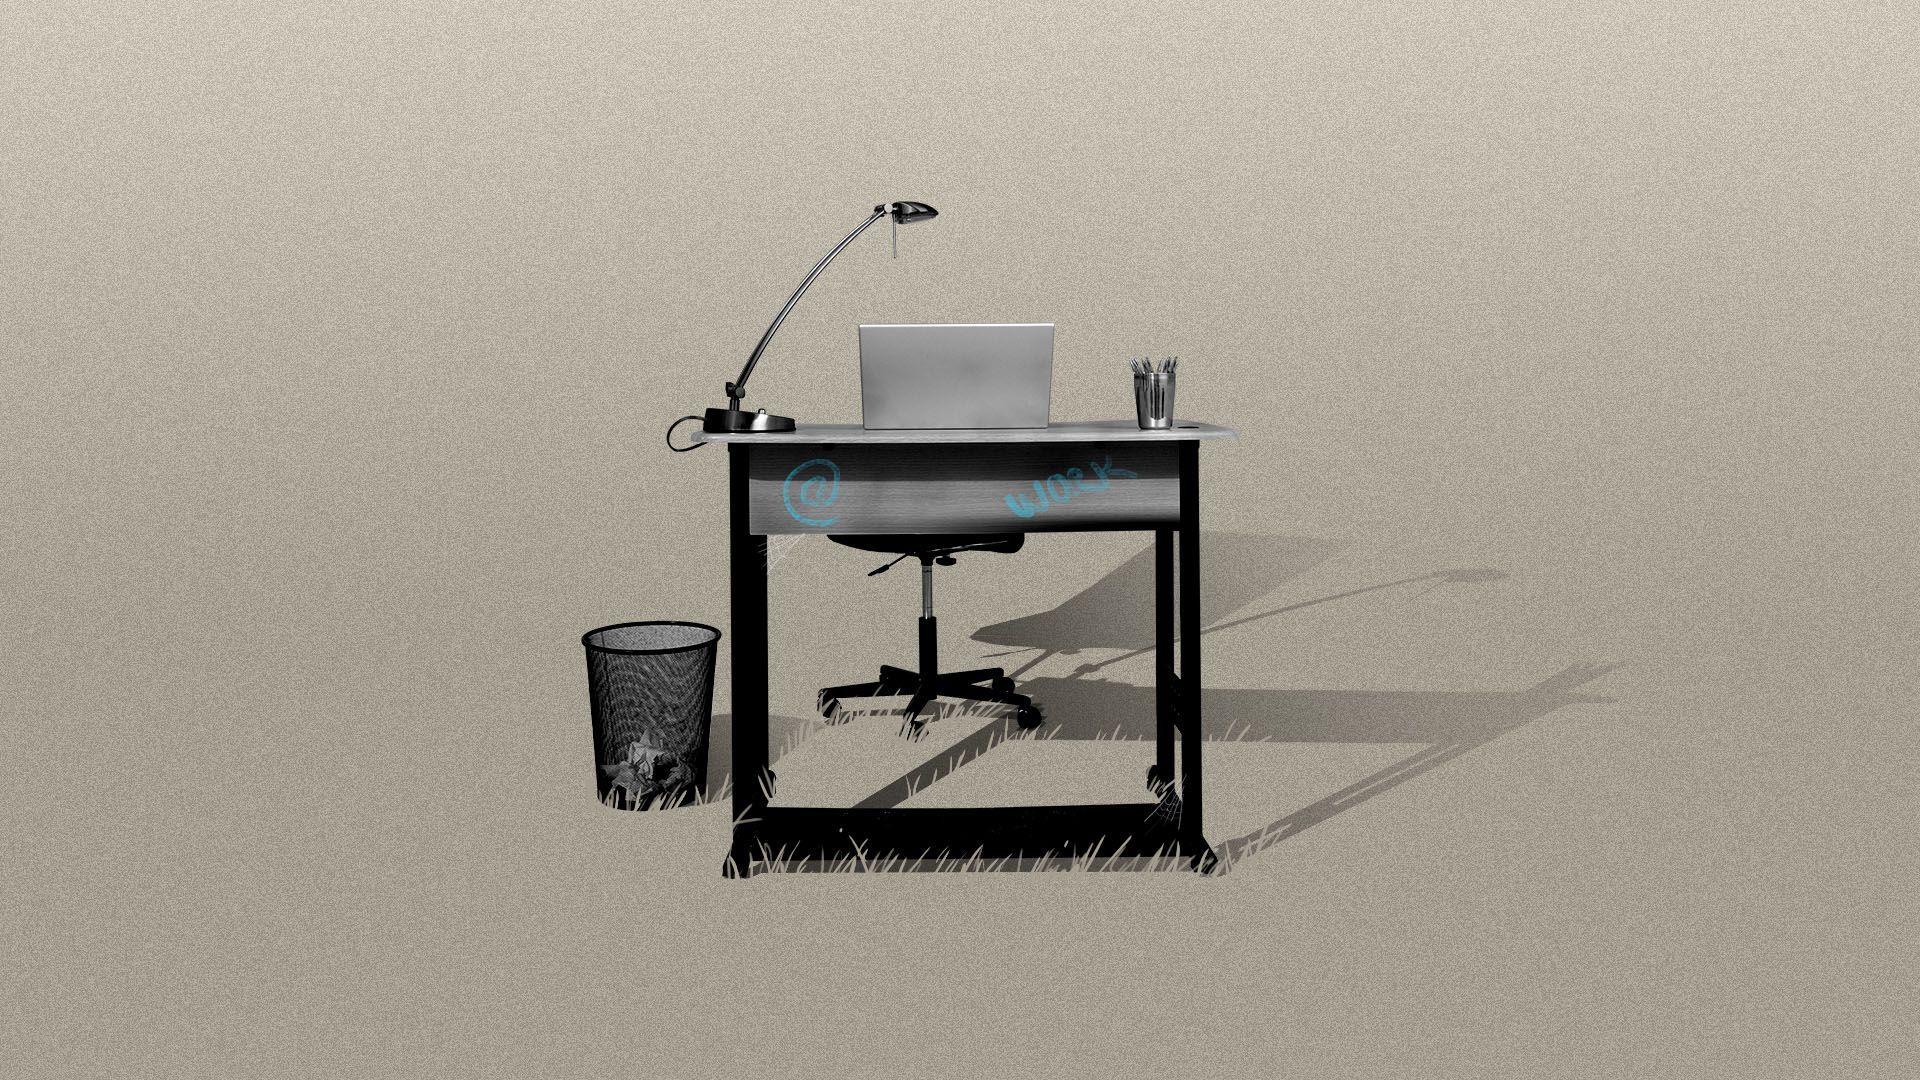 Illustration of an office desk sitting abandoned in a field